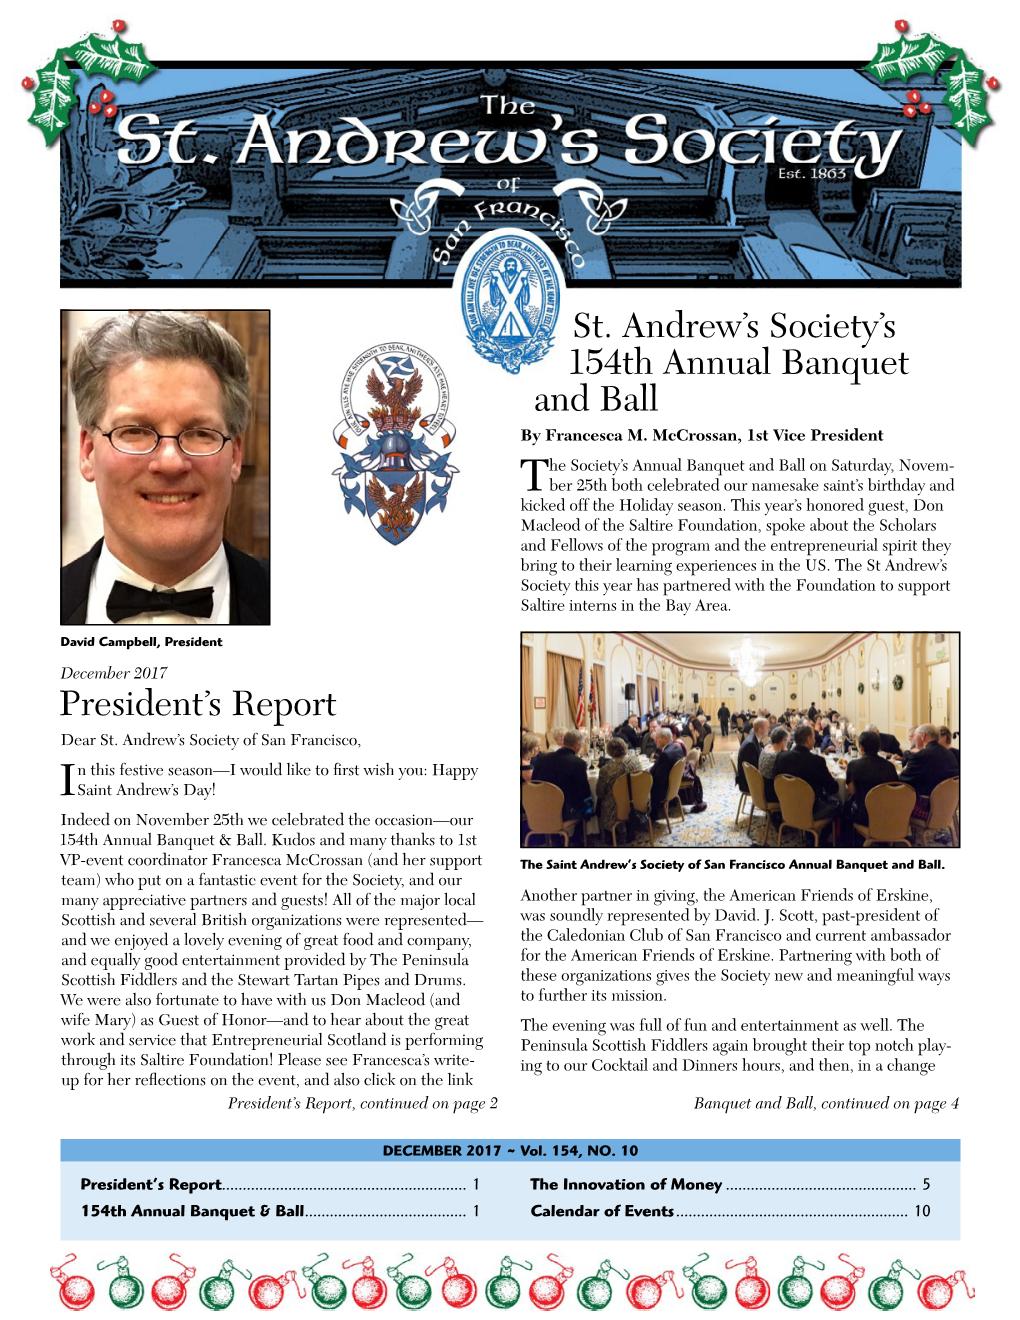 St. Andrew's Society's 154Th Annual Banquet and Ball